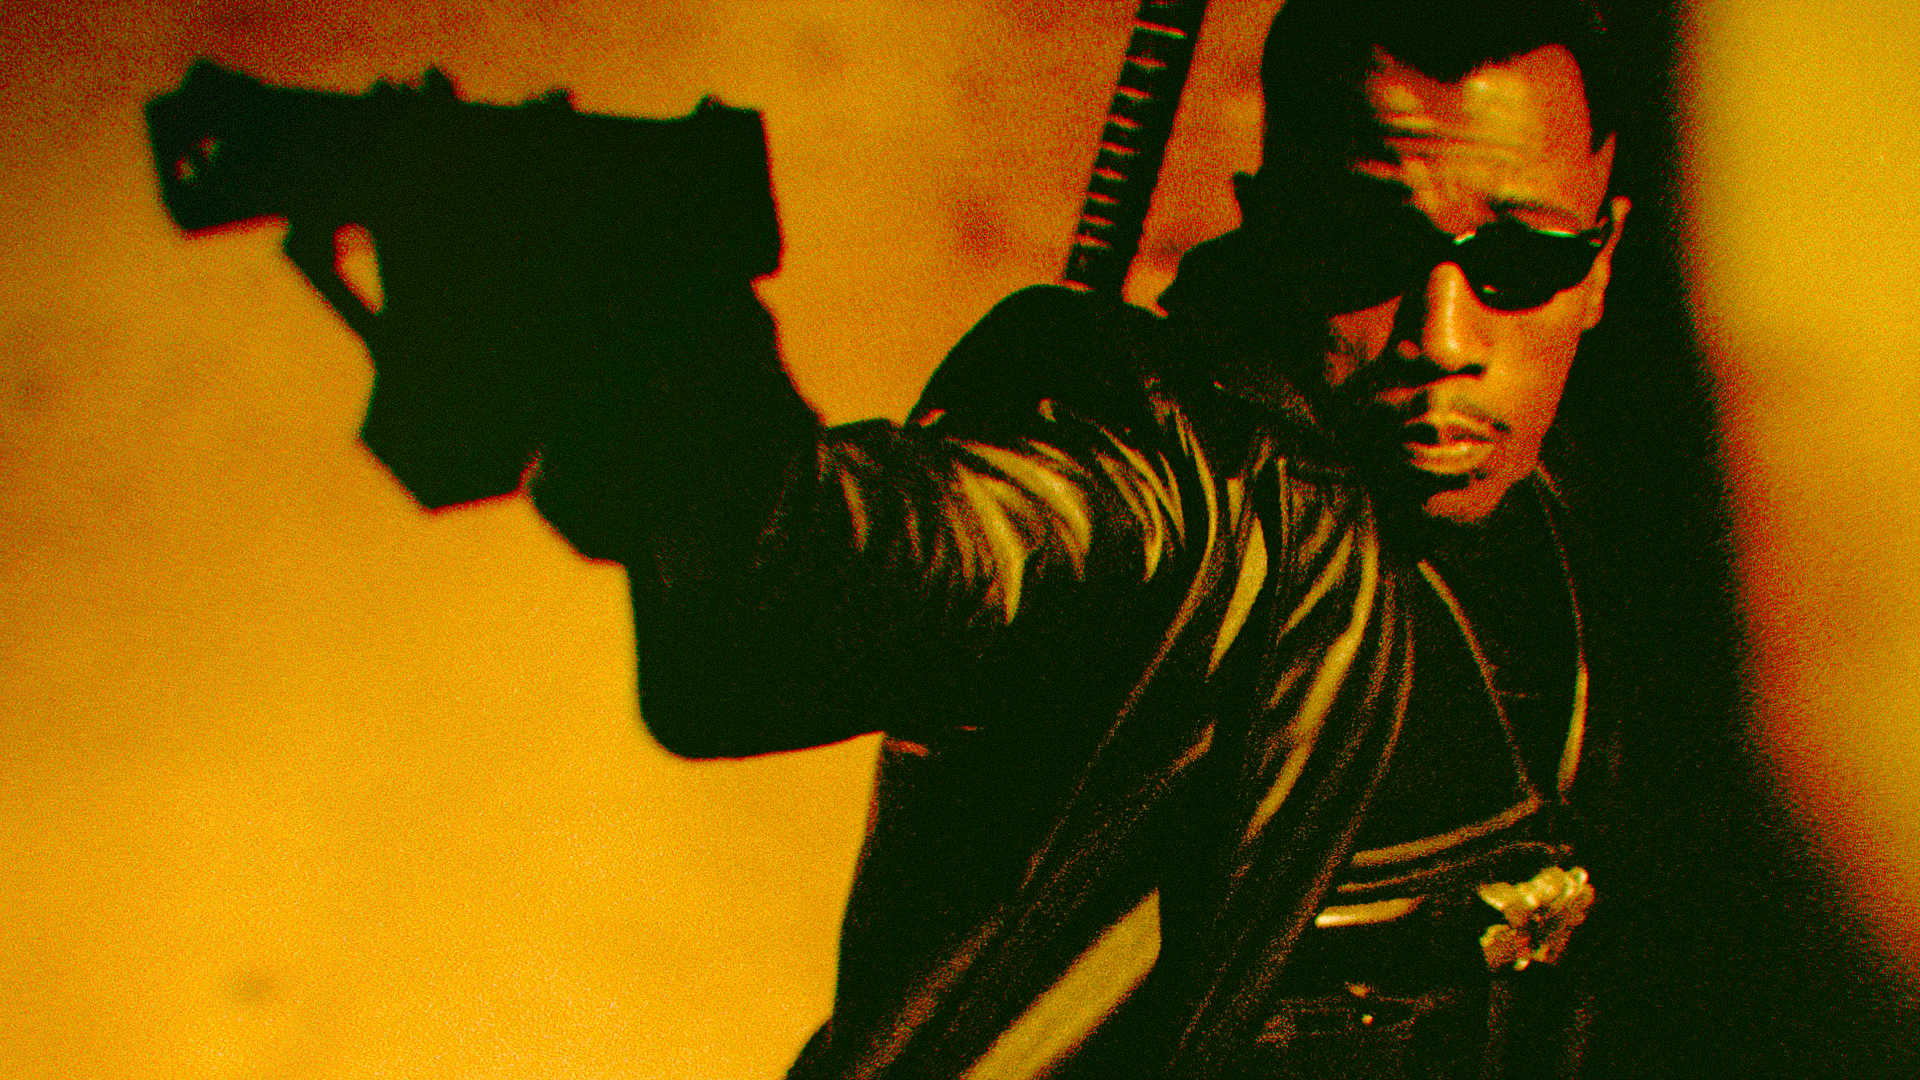 Actor Wesley Snipes raises a gun in a scene from the film Blade